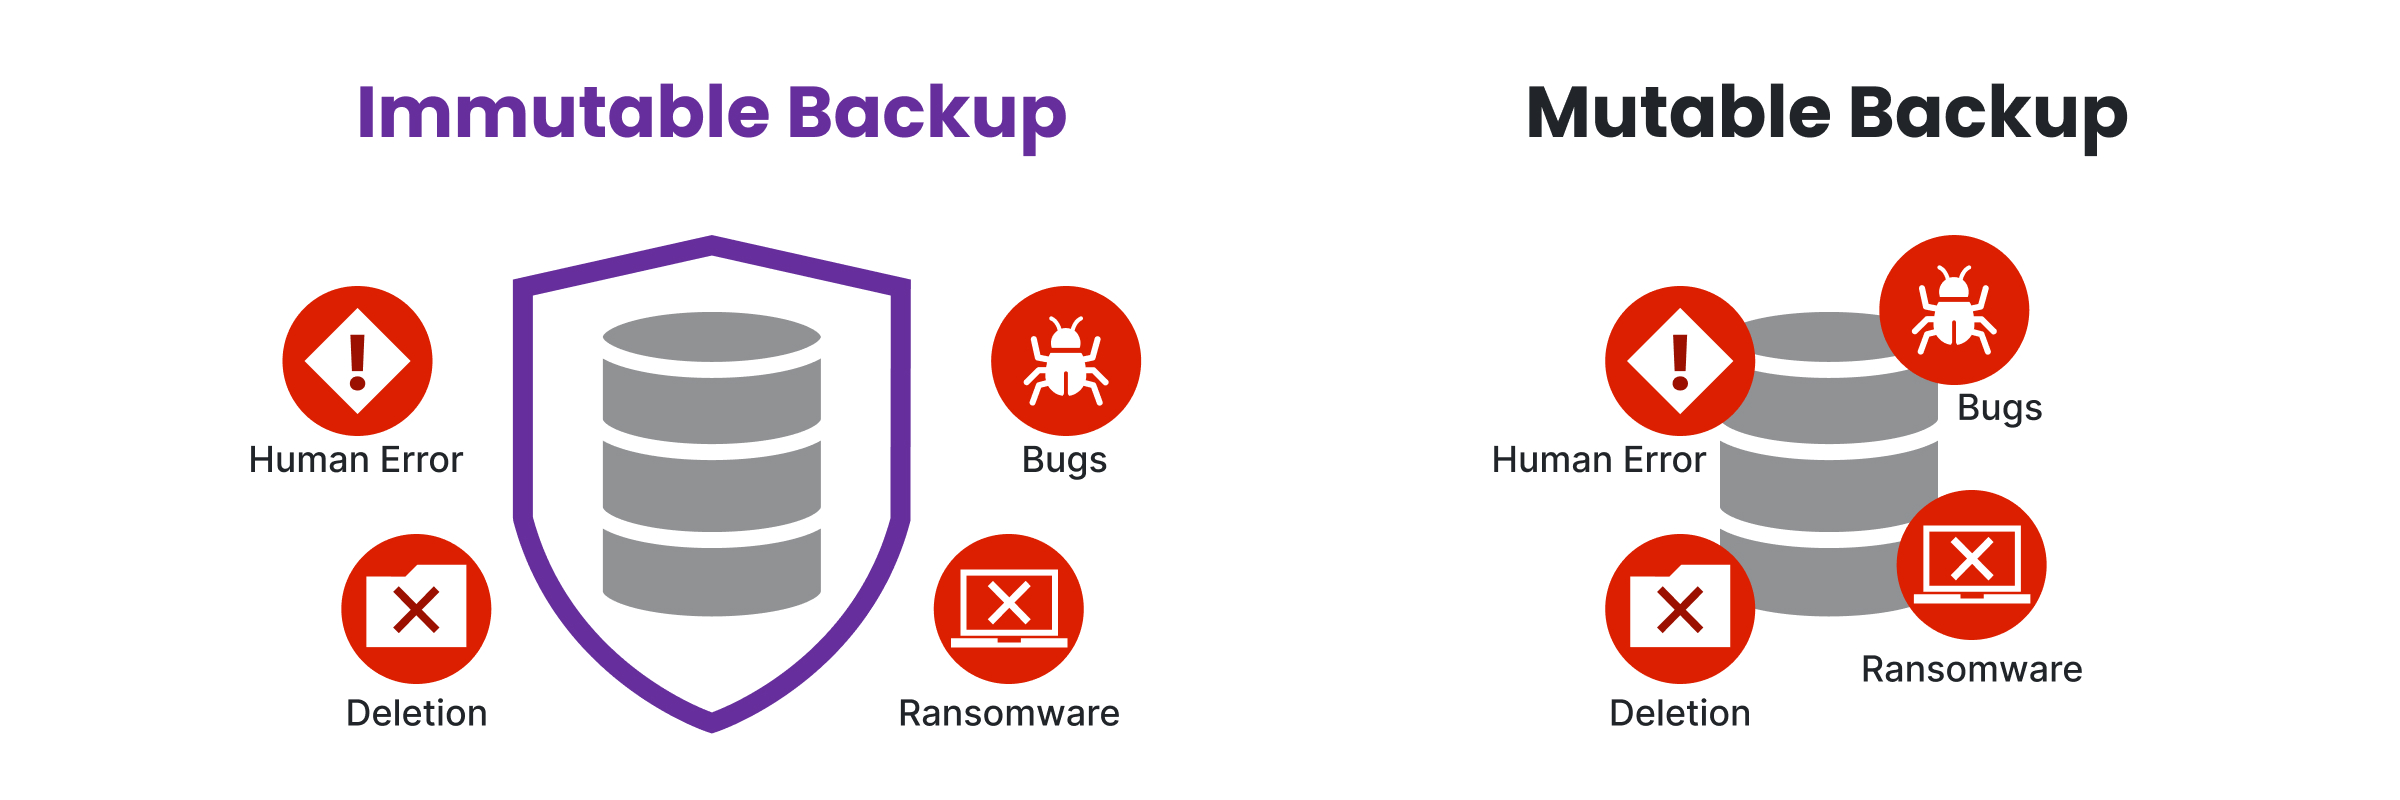 Comparative graphic highlighting differences between immutable and mutable backups, showing immutable backups protected against human error, bugs, and ransomware, while mutable backups are vulnerable to these threats